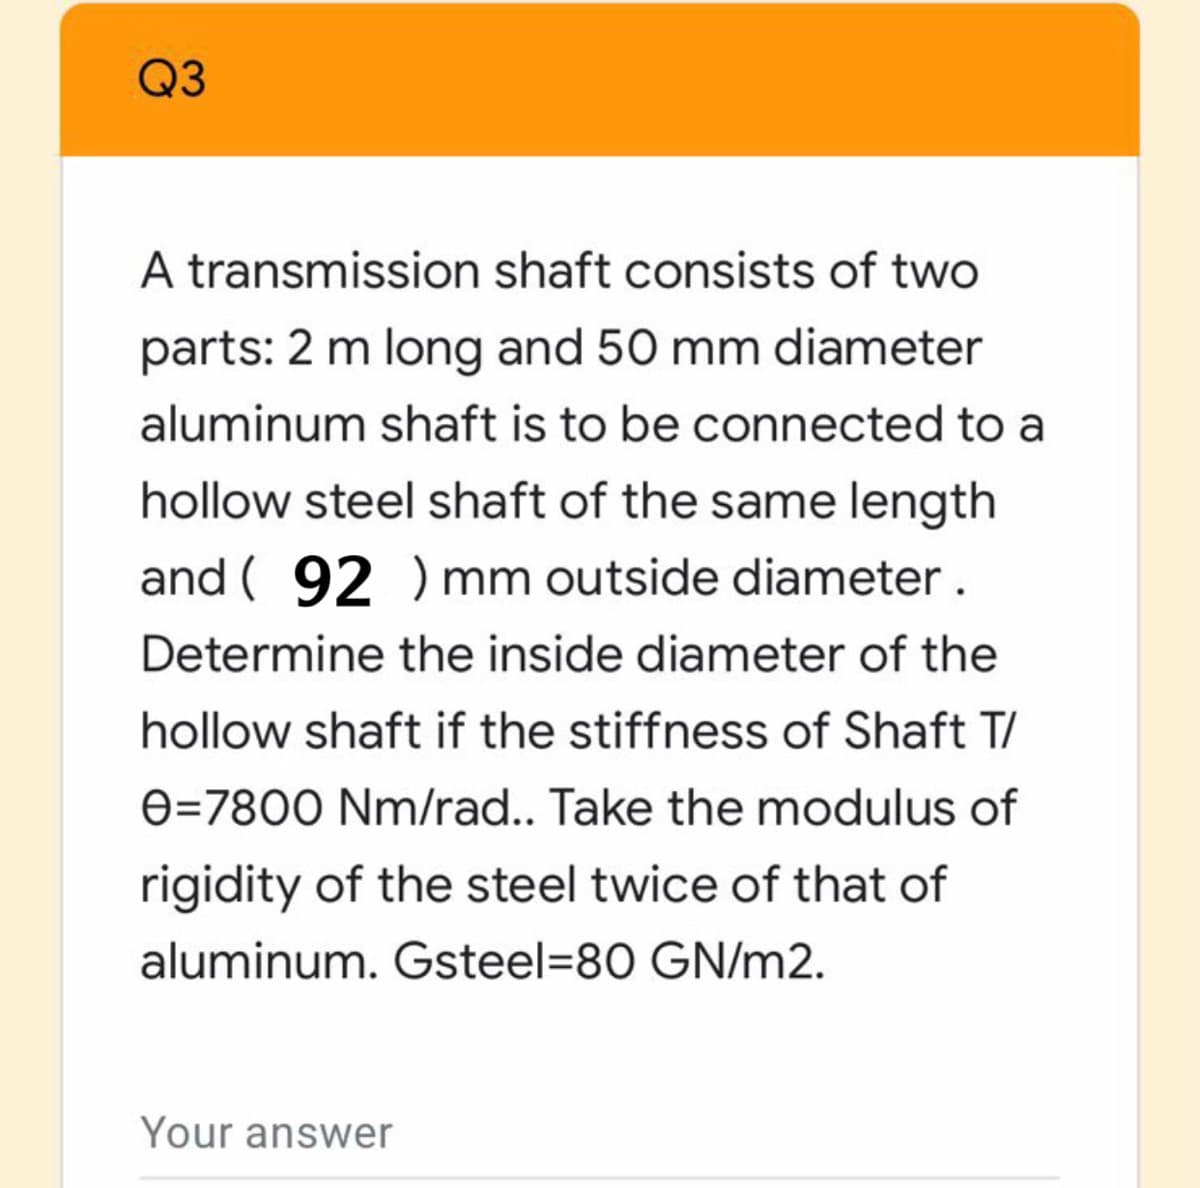 Q3
A transmission shaft consists of two
parts: 2 m long and 50 mm diameter
aluminum shaft is to be connected to a
hollow steel shaft of the same length
and ( 92 ) mm outside diameter.
Determine the inside diameter of the
hollow shaft if the stiffness of Shaft T/
e=7800 Nm/rad.. Take the modulus of
rigidity of the steel twice of that of
aluminum. Gsteel=80 GN/m2.
Your answer
